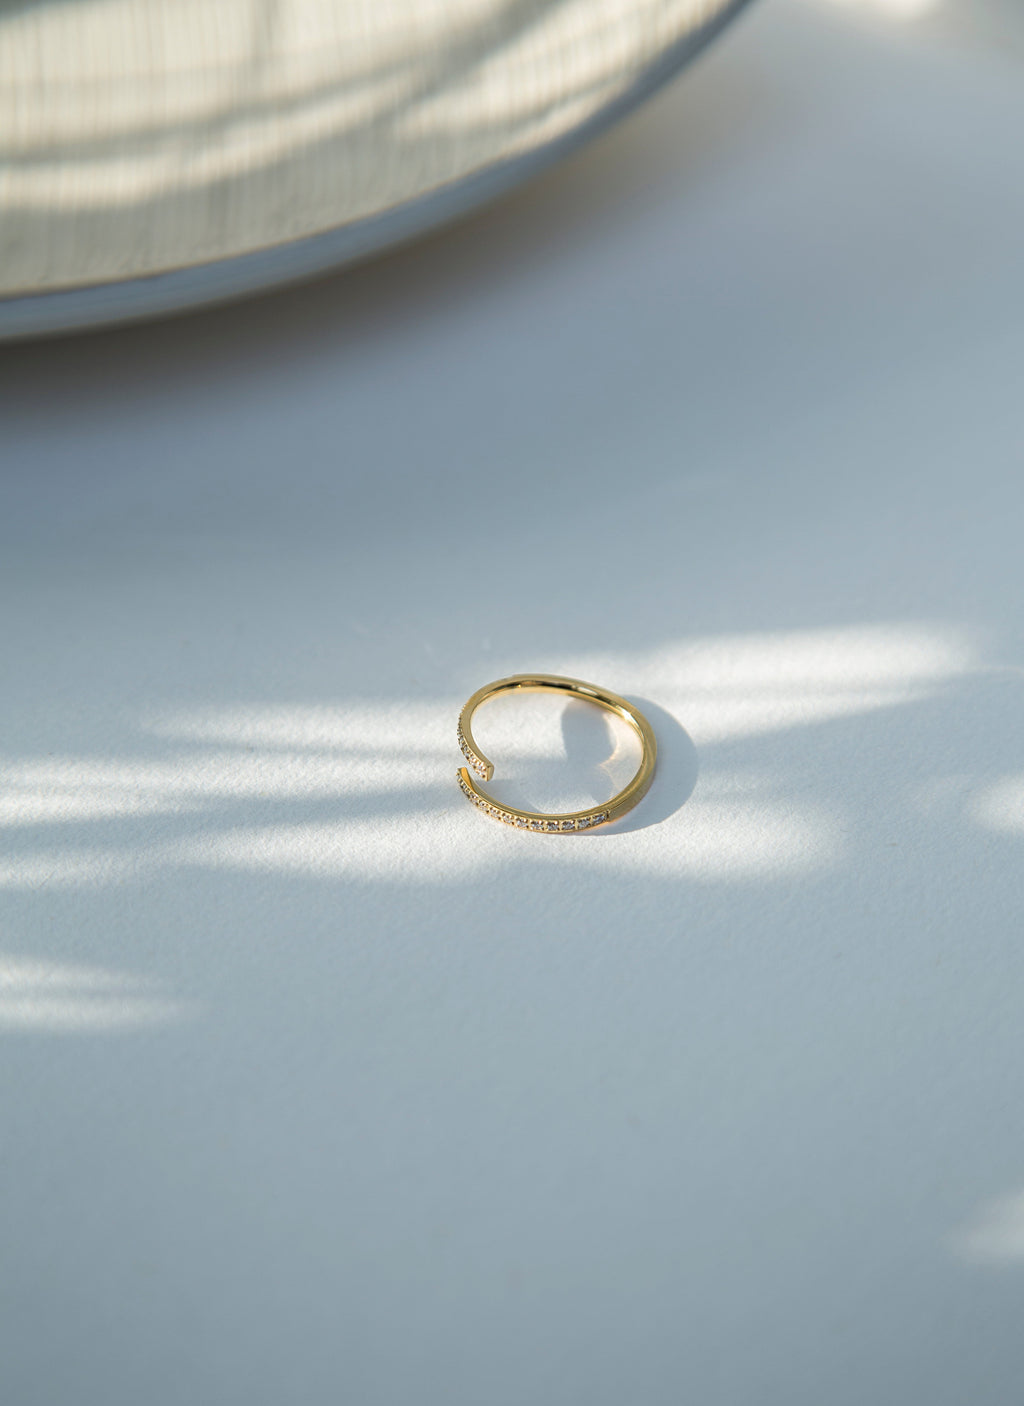 Sleek and subtle 'Lune Ring'. This adjustable minimalistic gold-plated ring is embedded with cubic zirconia. Crafted from premium materials, it promises both durability and a captivating shine that lasts. The adjustable feature ensures a perfect fit for any finger. A must have for all dainty jewelry lovers.